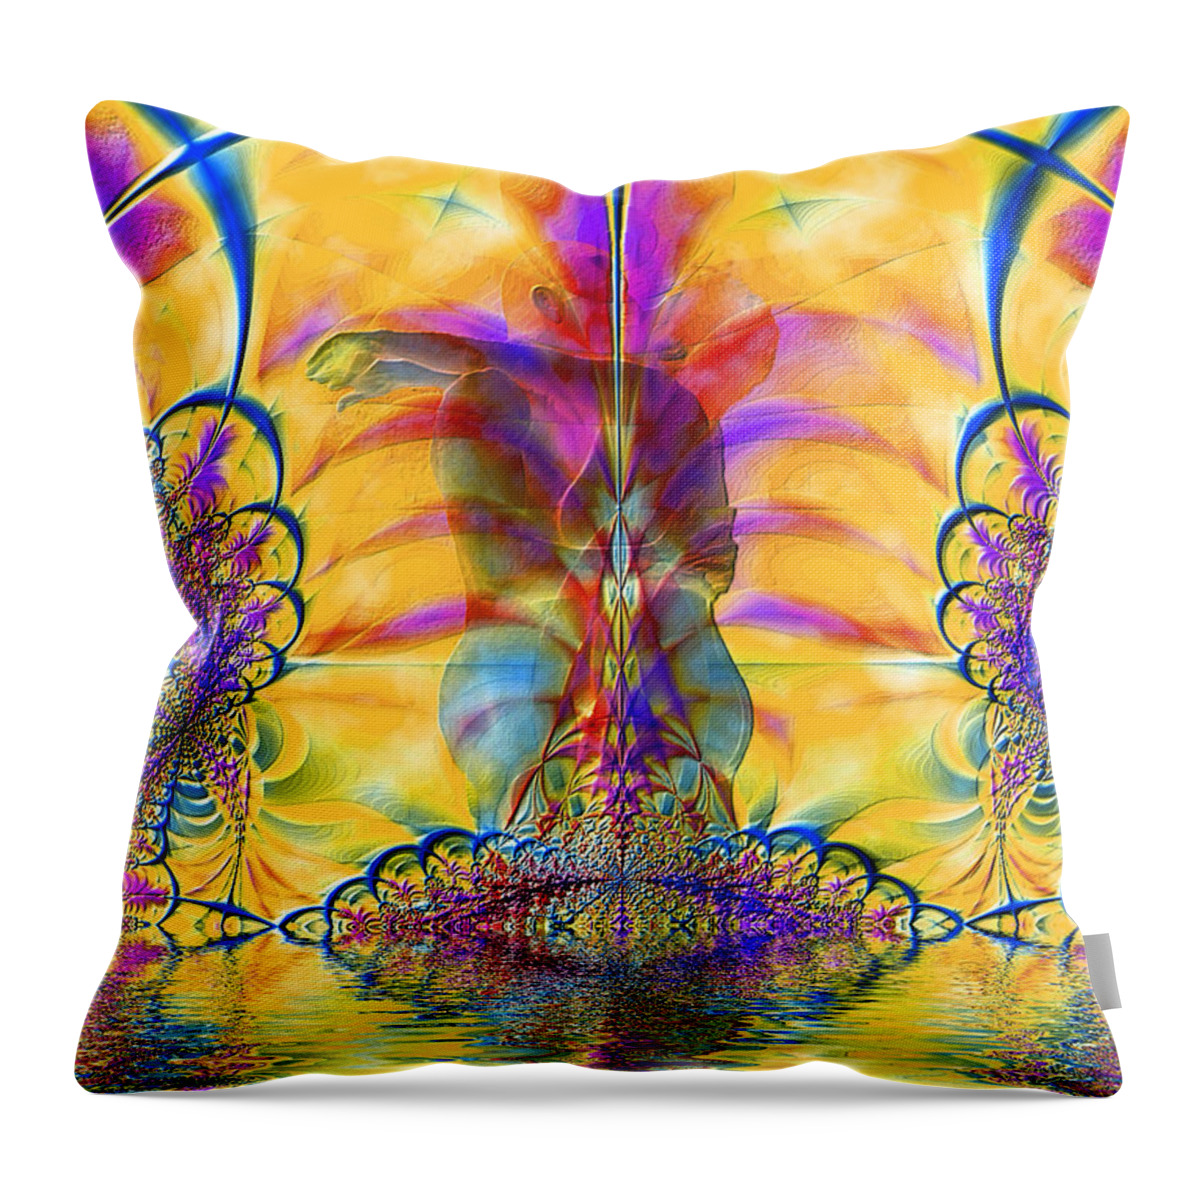 Nude Throw Pillow featuring the photograph Liquid Lace by Kurt Van Wagner